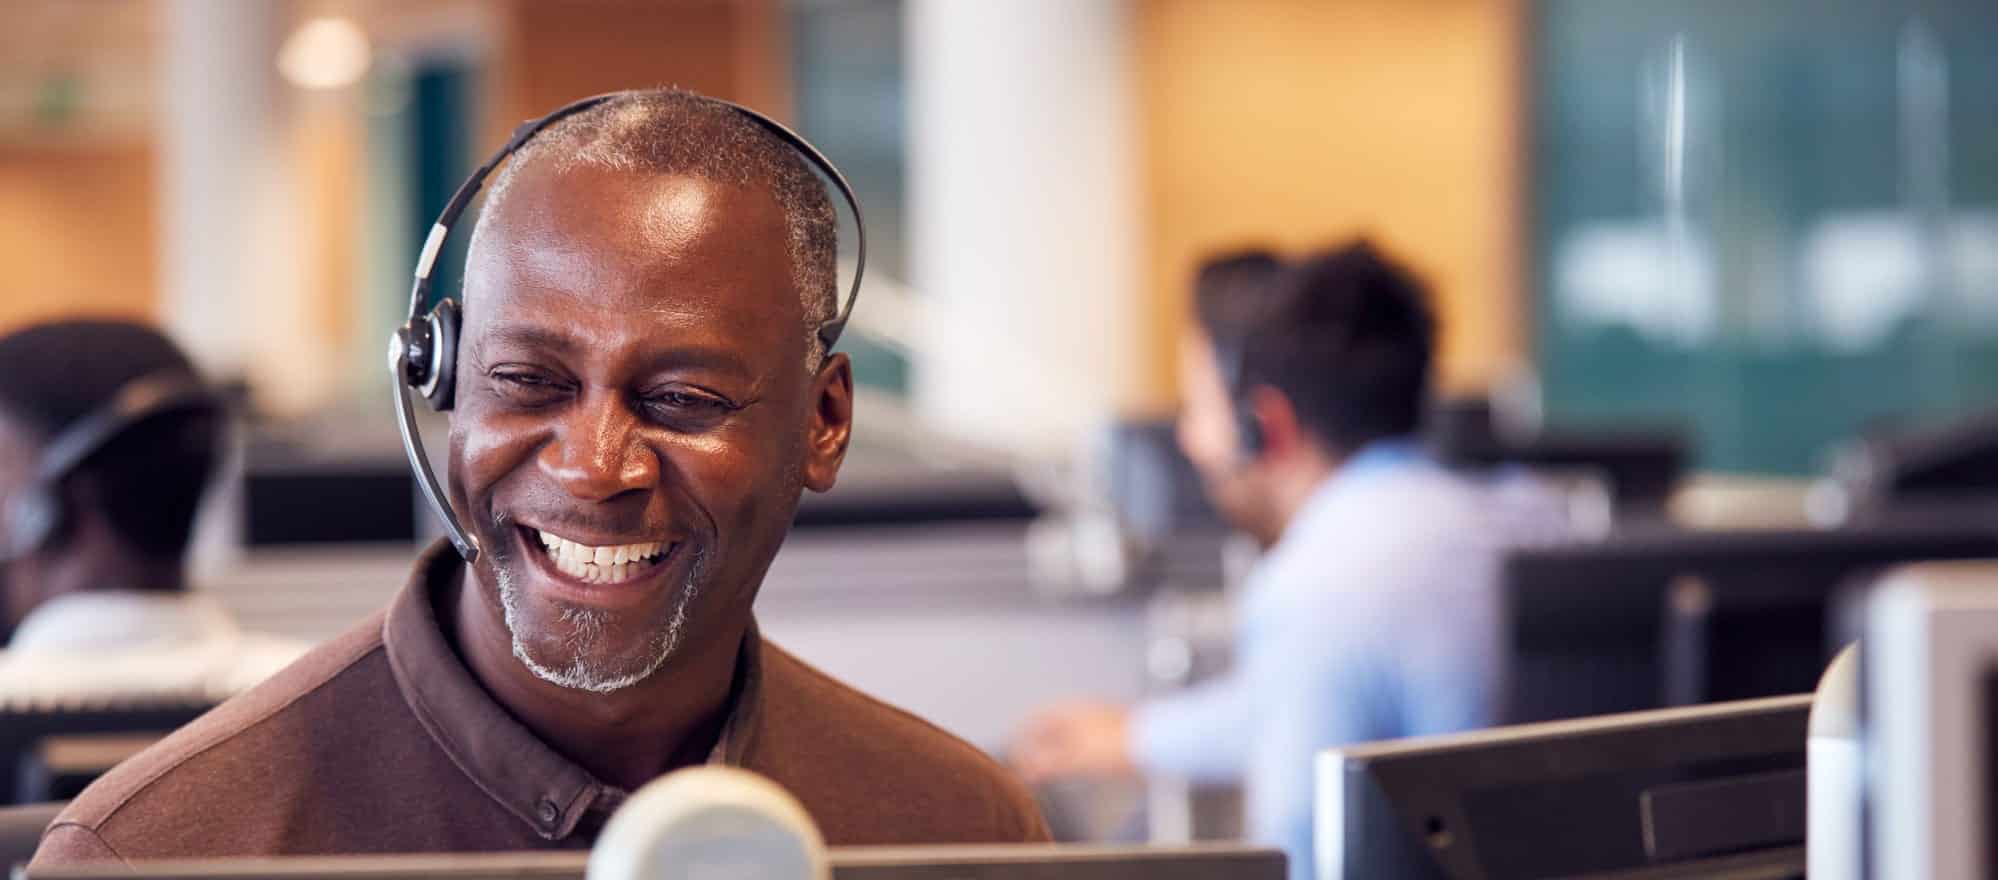 5 Must-Have Call Center Requirements Checklist for 2023